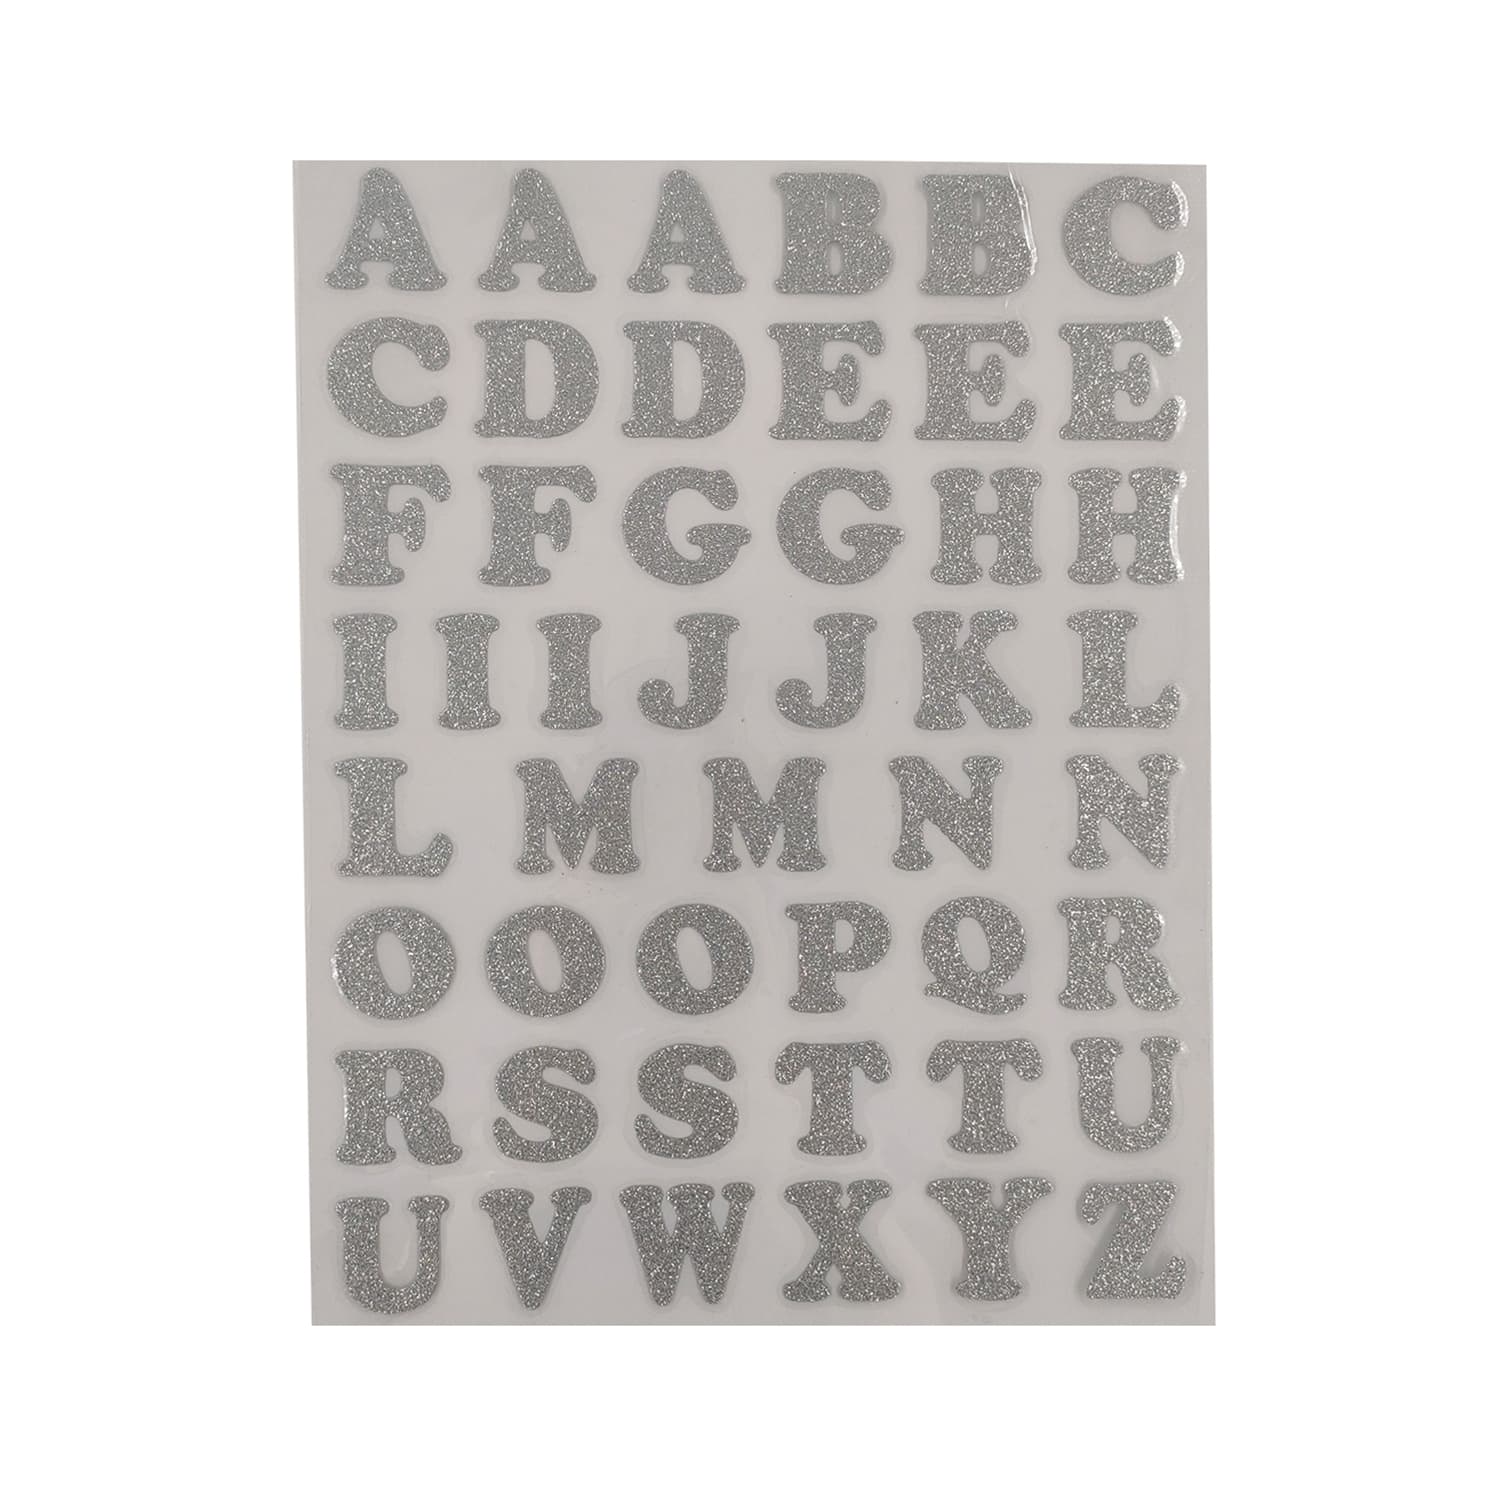 Transfermations Iron-On Letters: Glitter Silver | 1 Inches